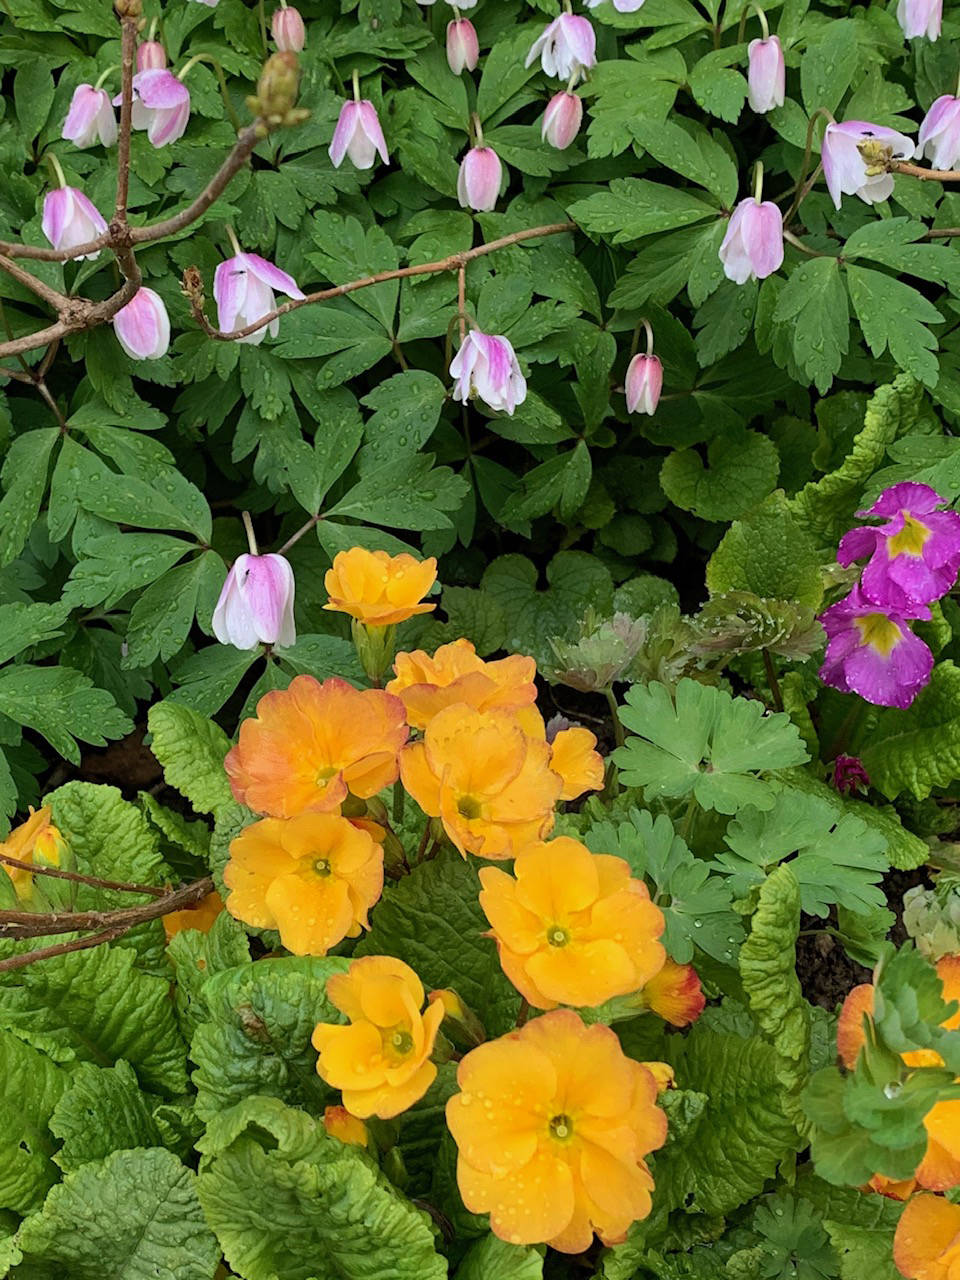 Primulas and anemone rosea greet a spring morning on May 15, 2019, at the Kachemak Gardener’s garden in Homer, Alaska. (Photo by Rosemary Fitzpatrick)